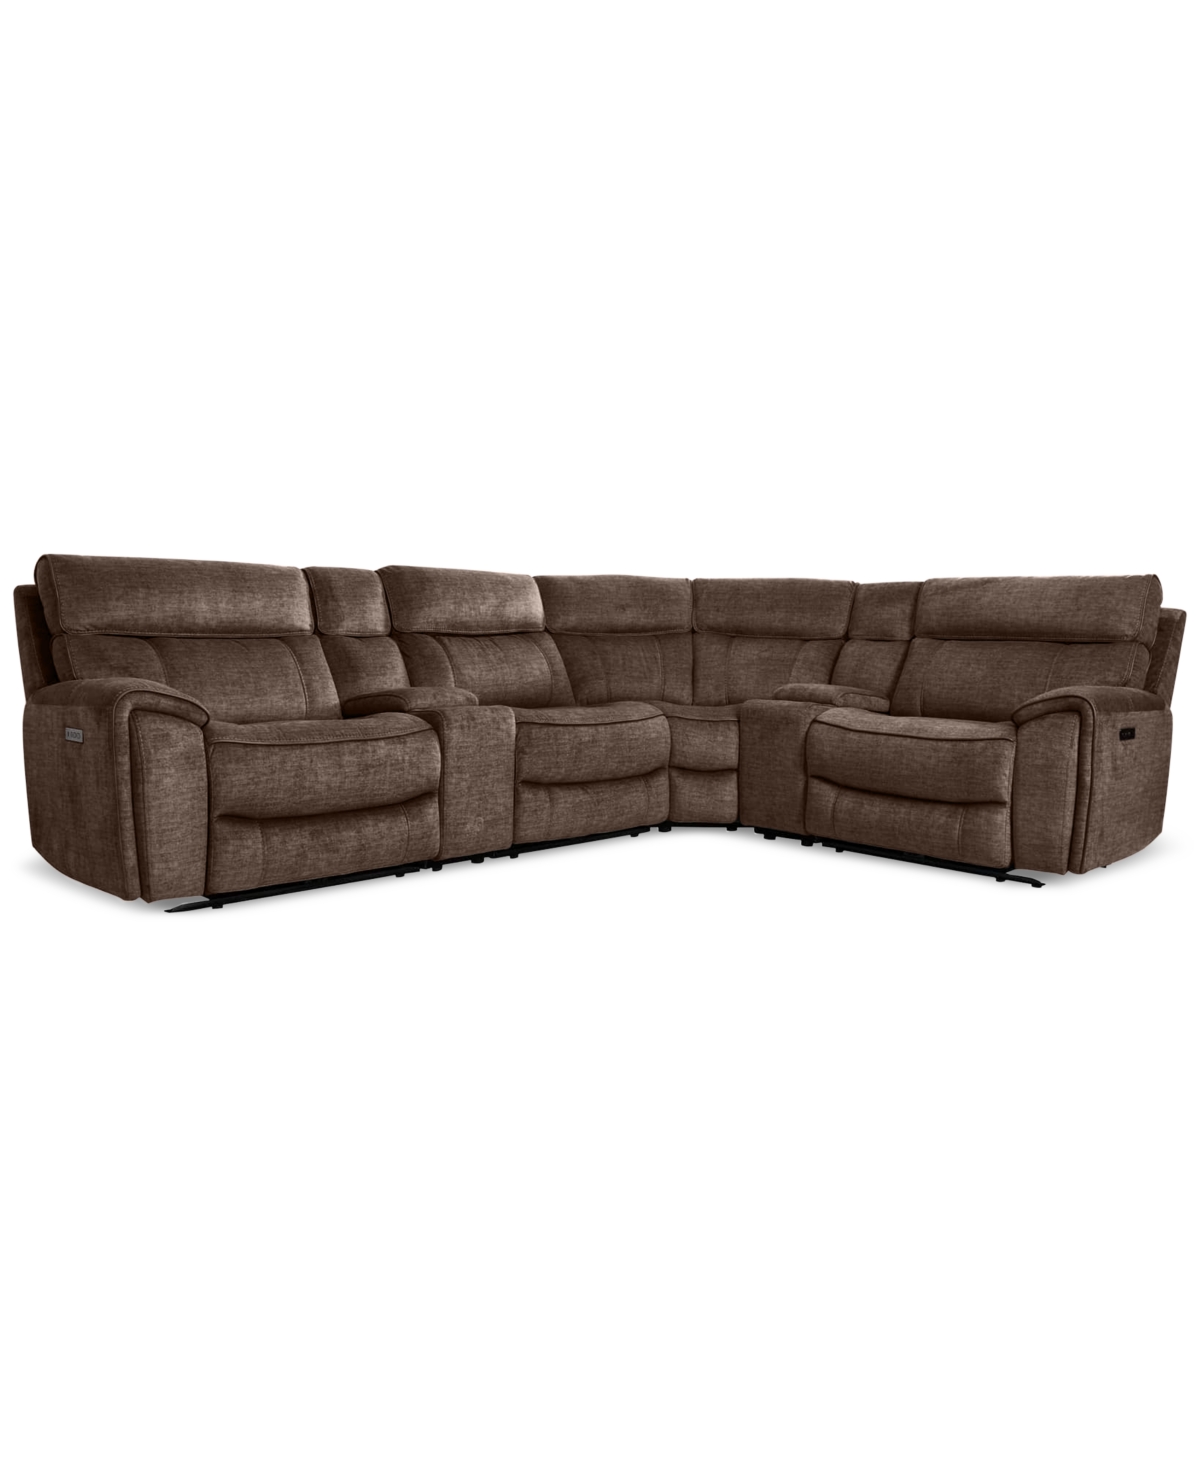 Furniture Hutchenson 6-pc. Fabric Sectional With 3 Power Recliners, Power Headrests And 2 Consoles With Usb In Chocolate Brown